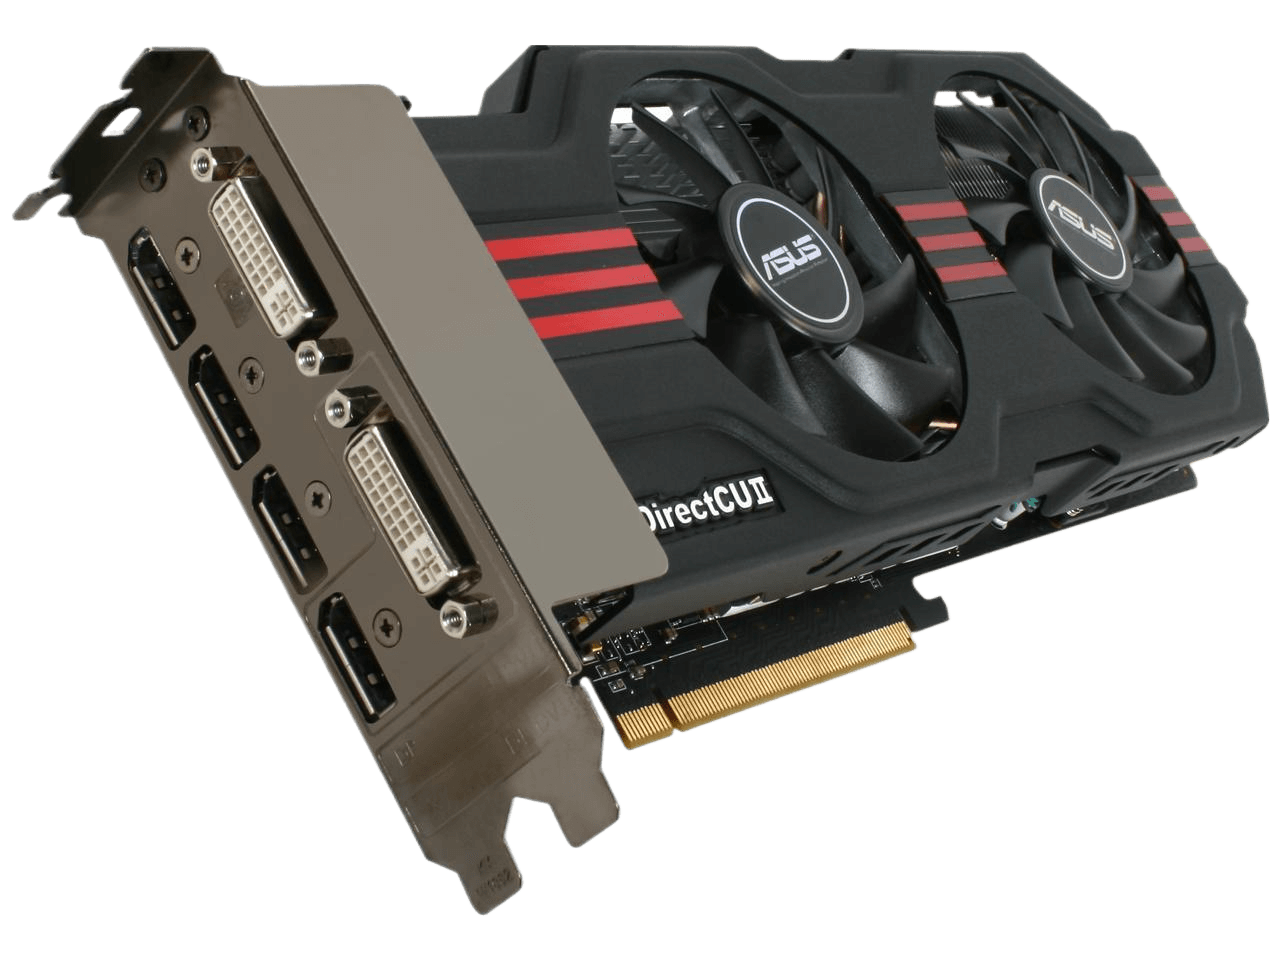 ASUS Radeon HD 6950 1GB GDDR5 PCI Express 2.1 x16 CrossFireX Support Video Card with Eyefinity EAH6950 DCII/2DI4S/1GD5